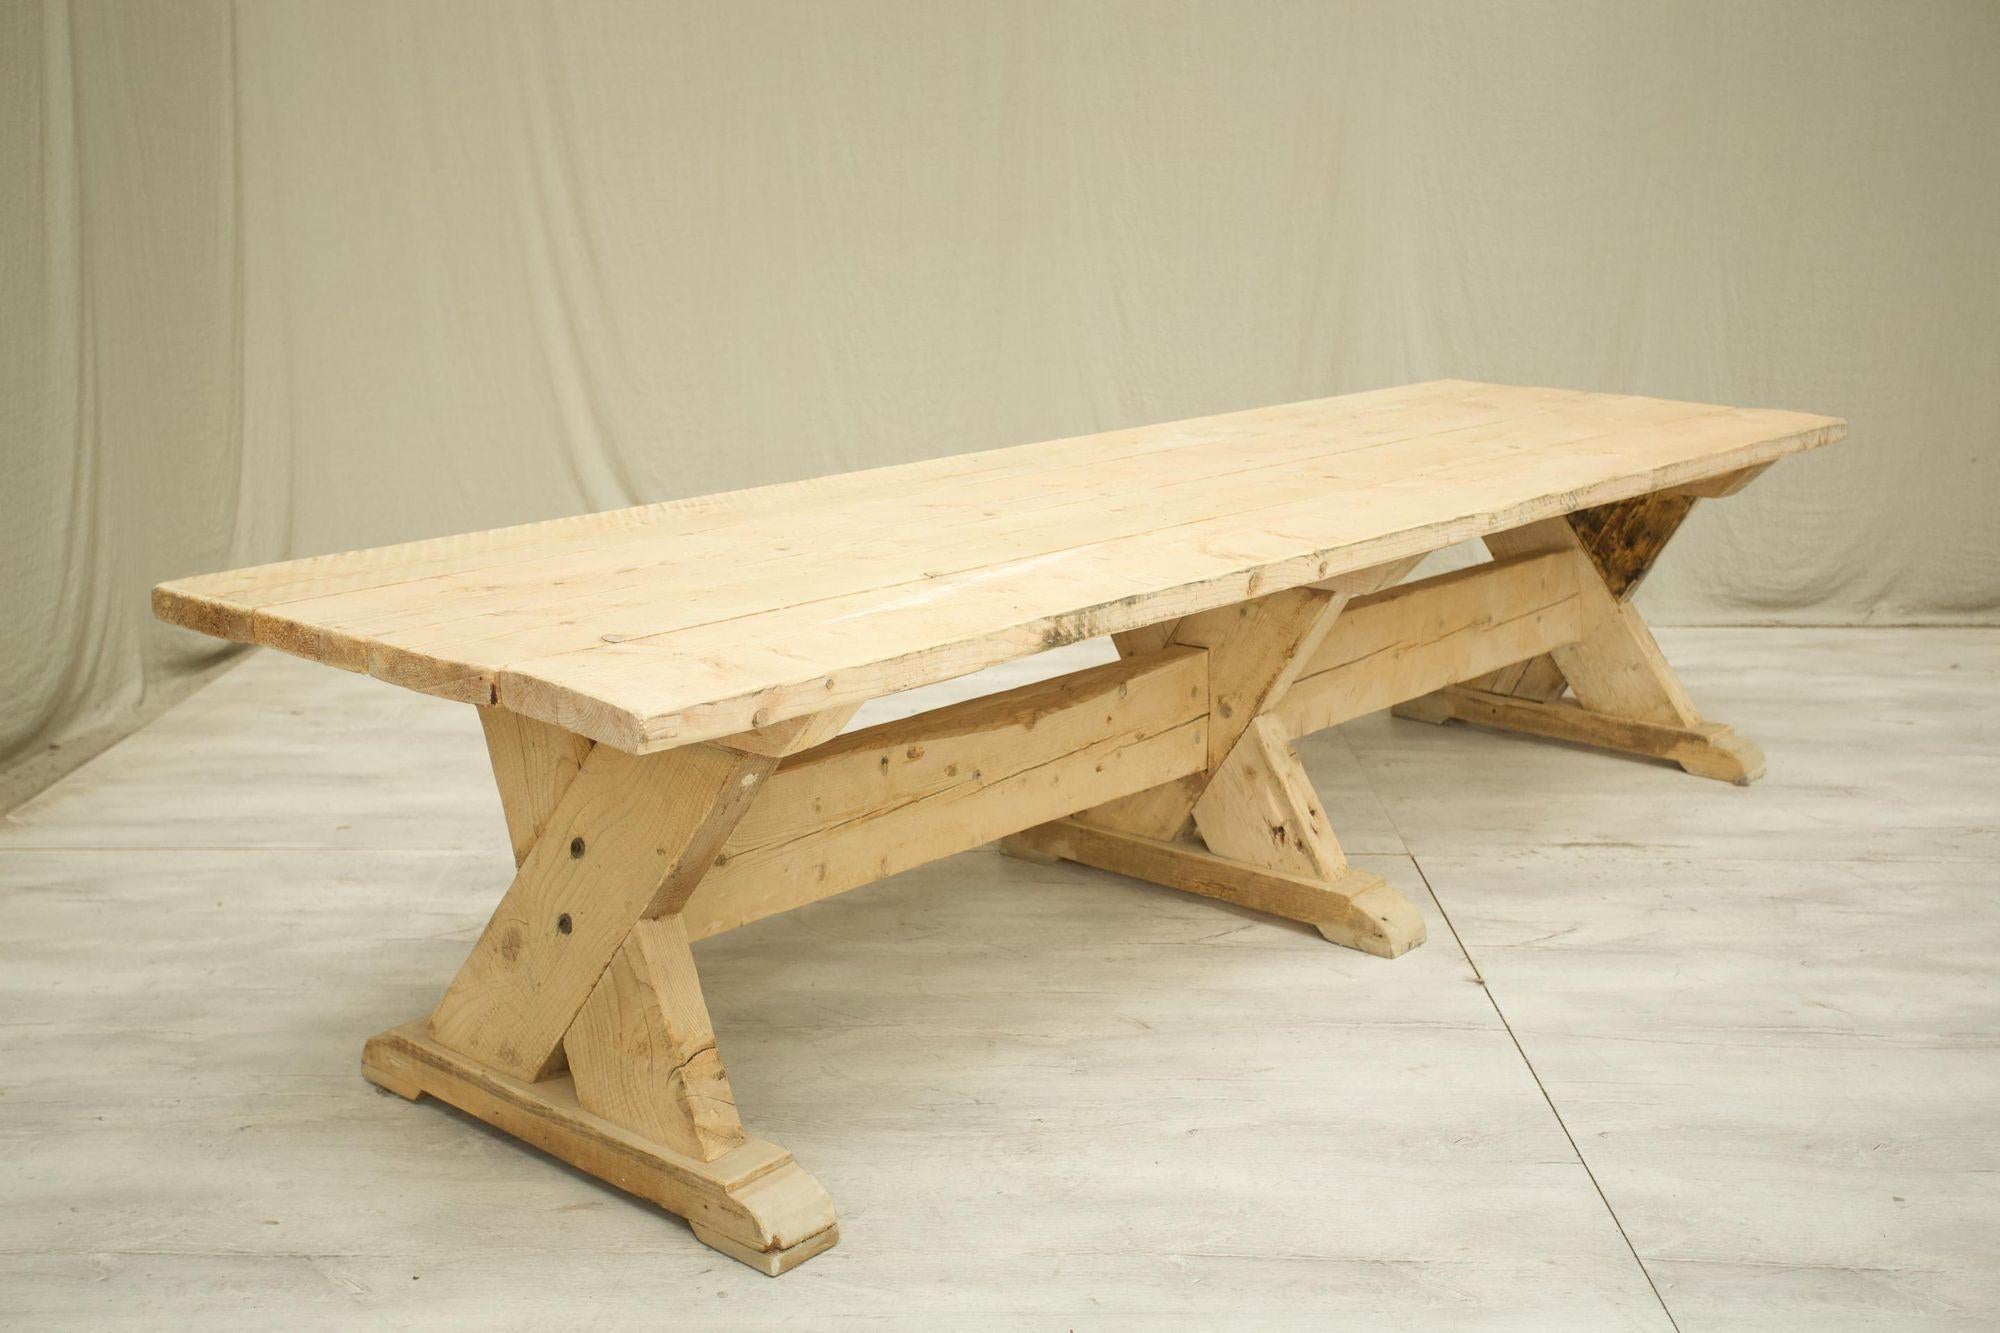 These are the latest designs of our bespoke dining table range. We have these made in the South of France by a talented crafts man who uses thick period reclaimed pine floorboards to create these rather stunning and rustic dining tables.
 
We can